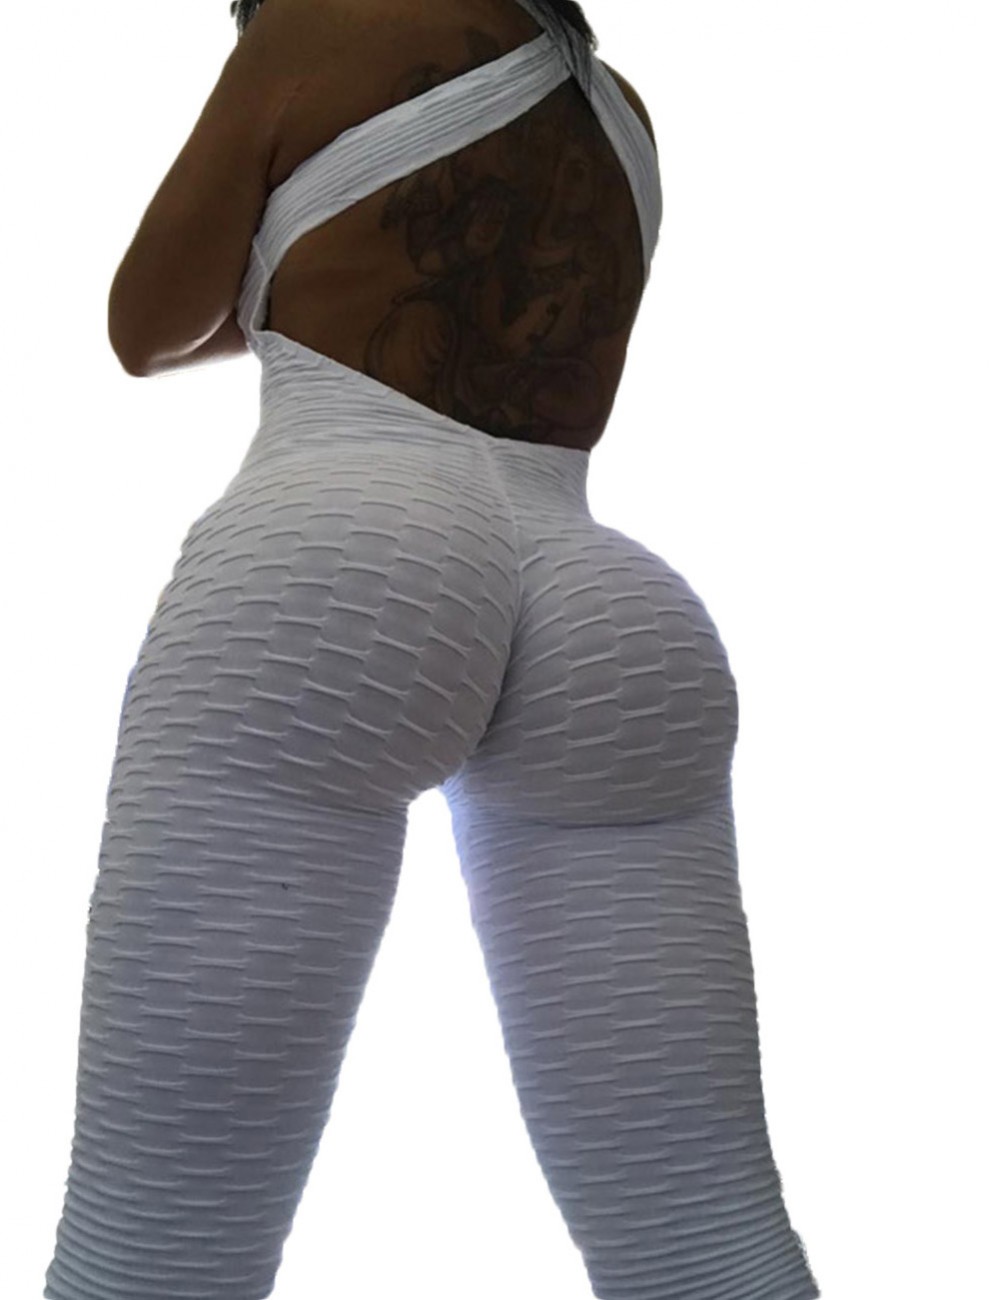 Fitness White Butt Lifting Workout Jumpsuit Jacquard Sexy Ladies